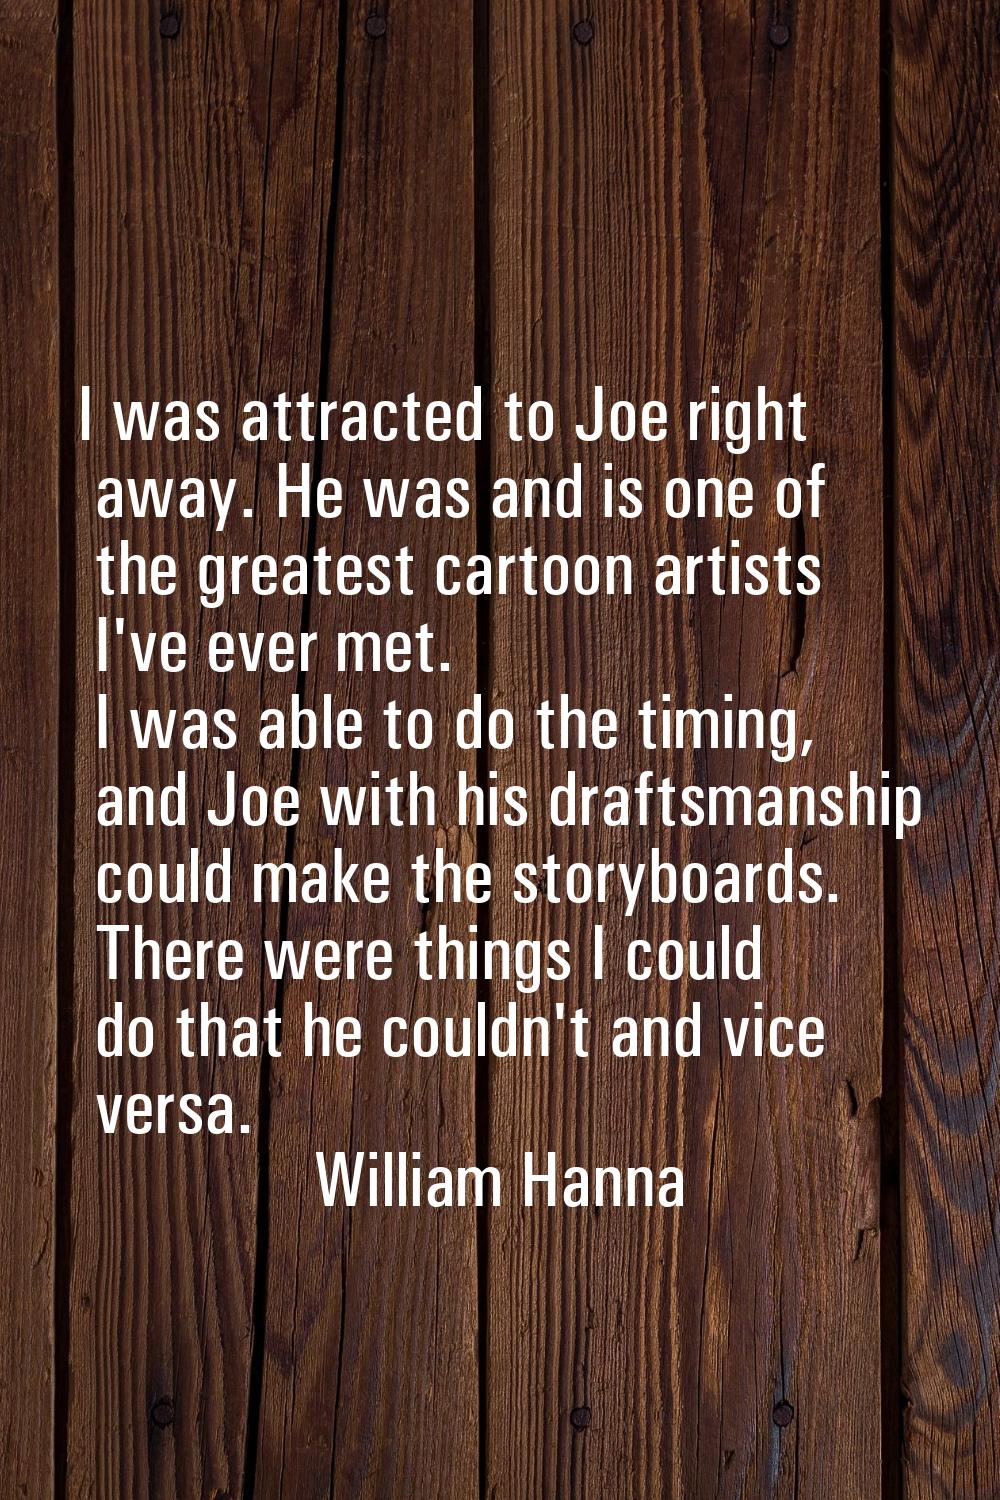 I was attracted to Joe right away. He was and is one of the greatest cartoon artists I've ever met.